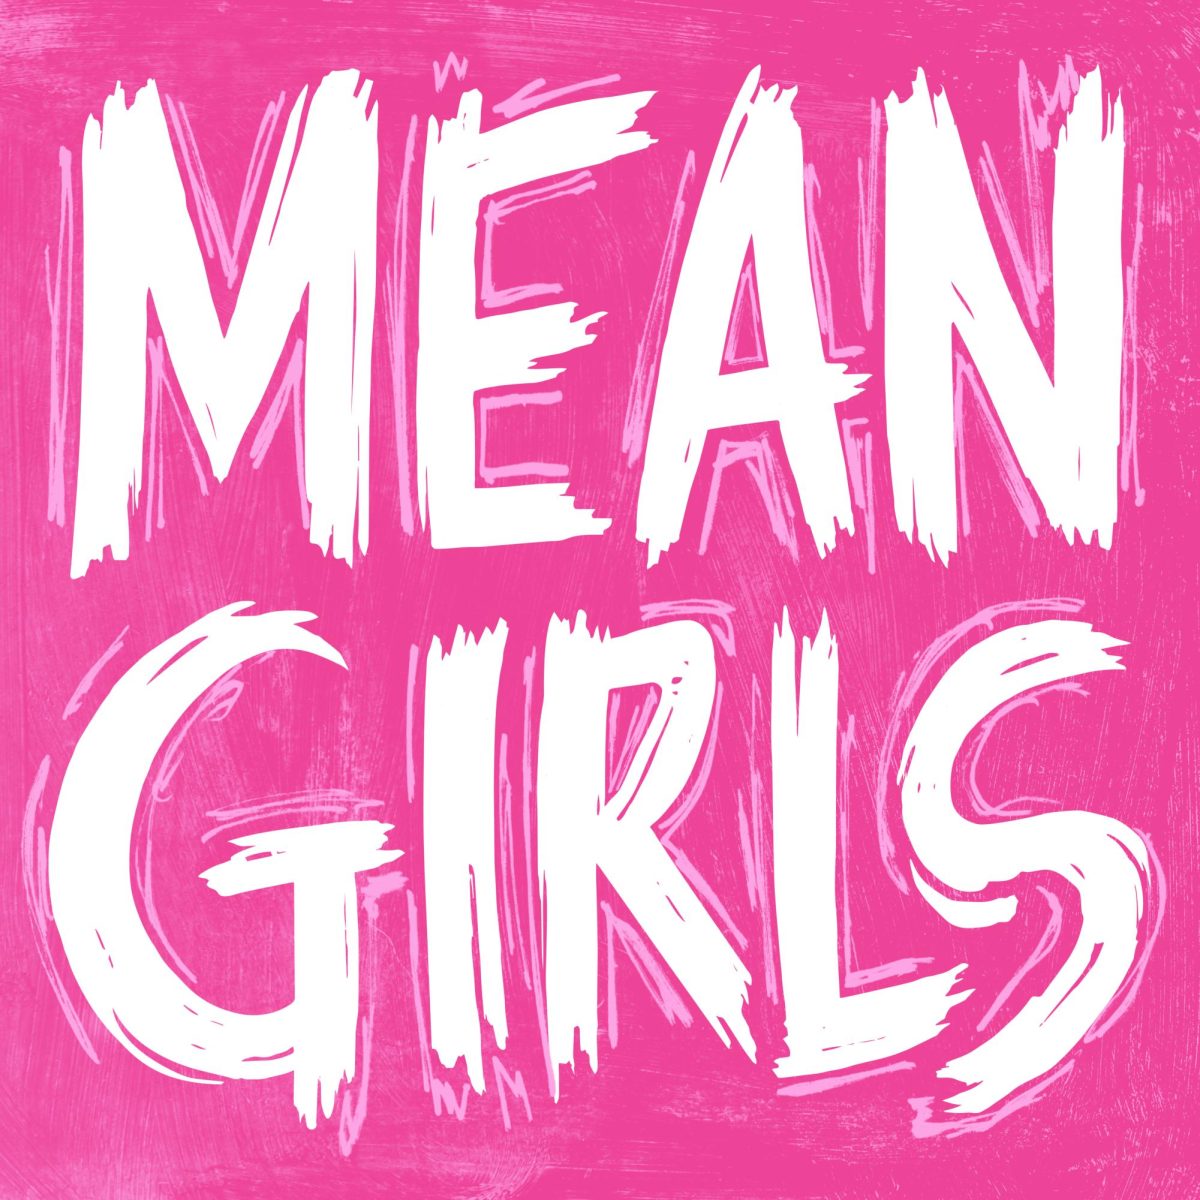 Mean+Girls+on+Broadway+logo+courtesy+of+Playhouse+Square.